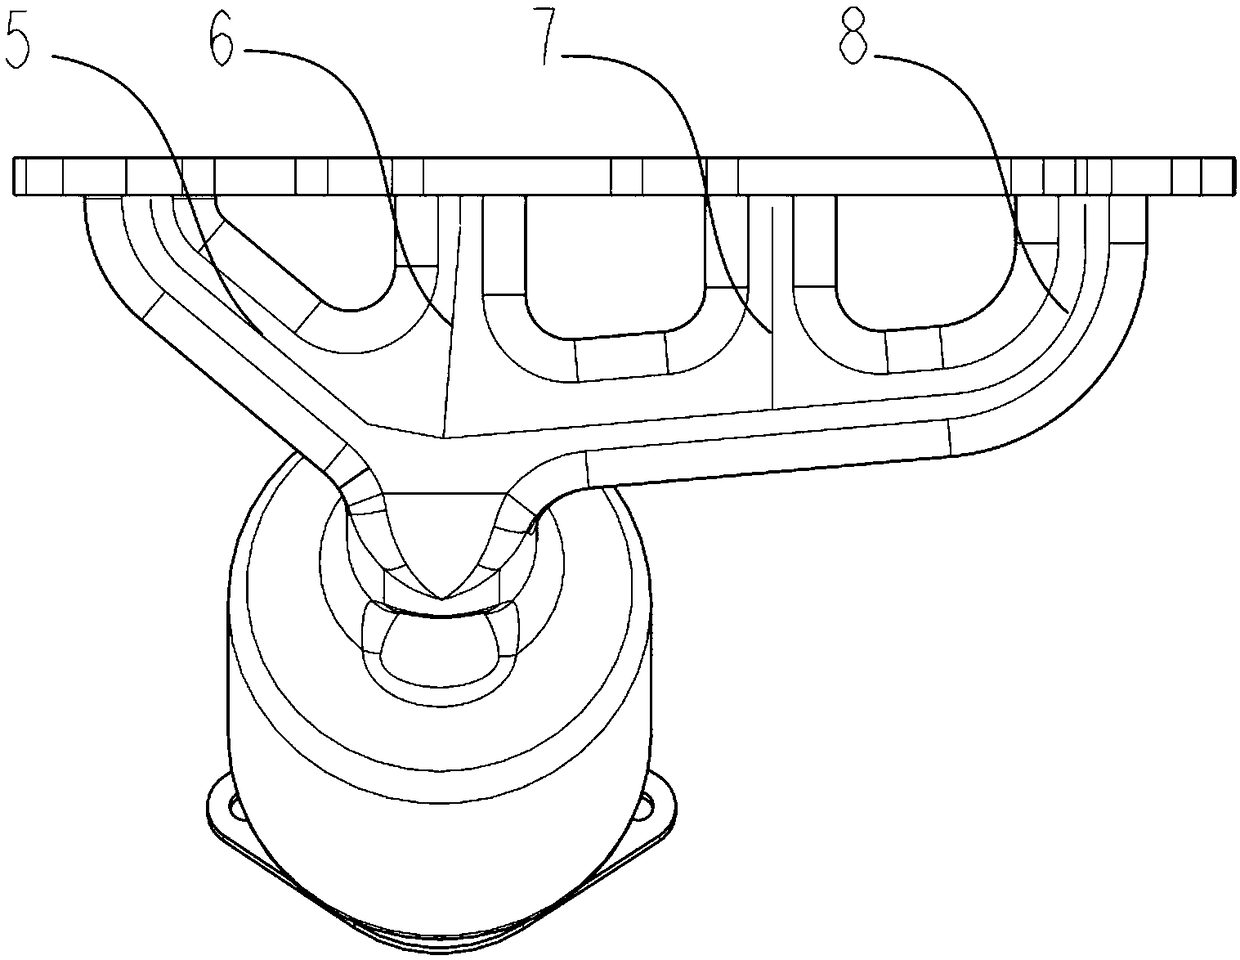 Exhaust manifold structure for improving engine cold start emission